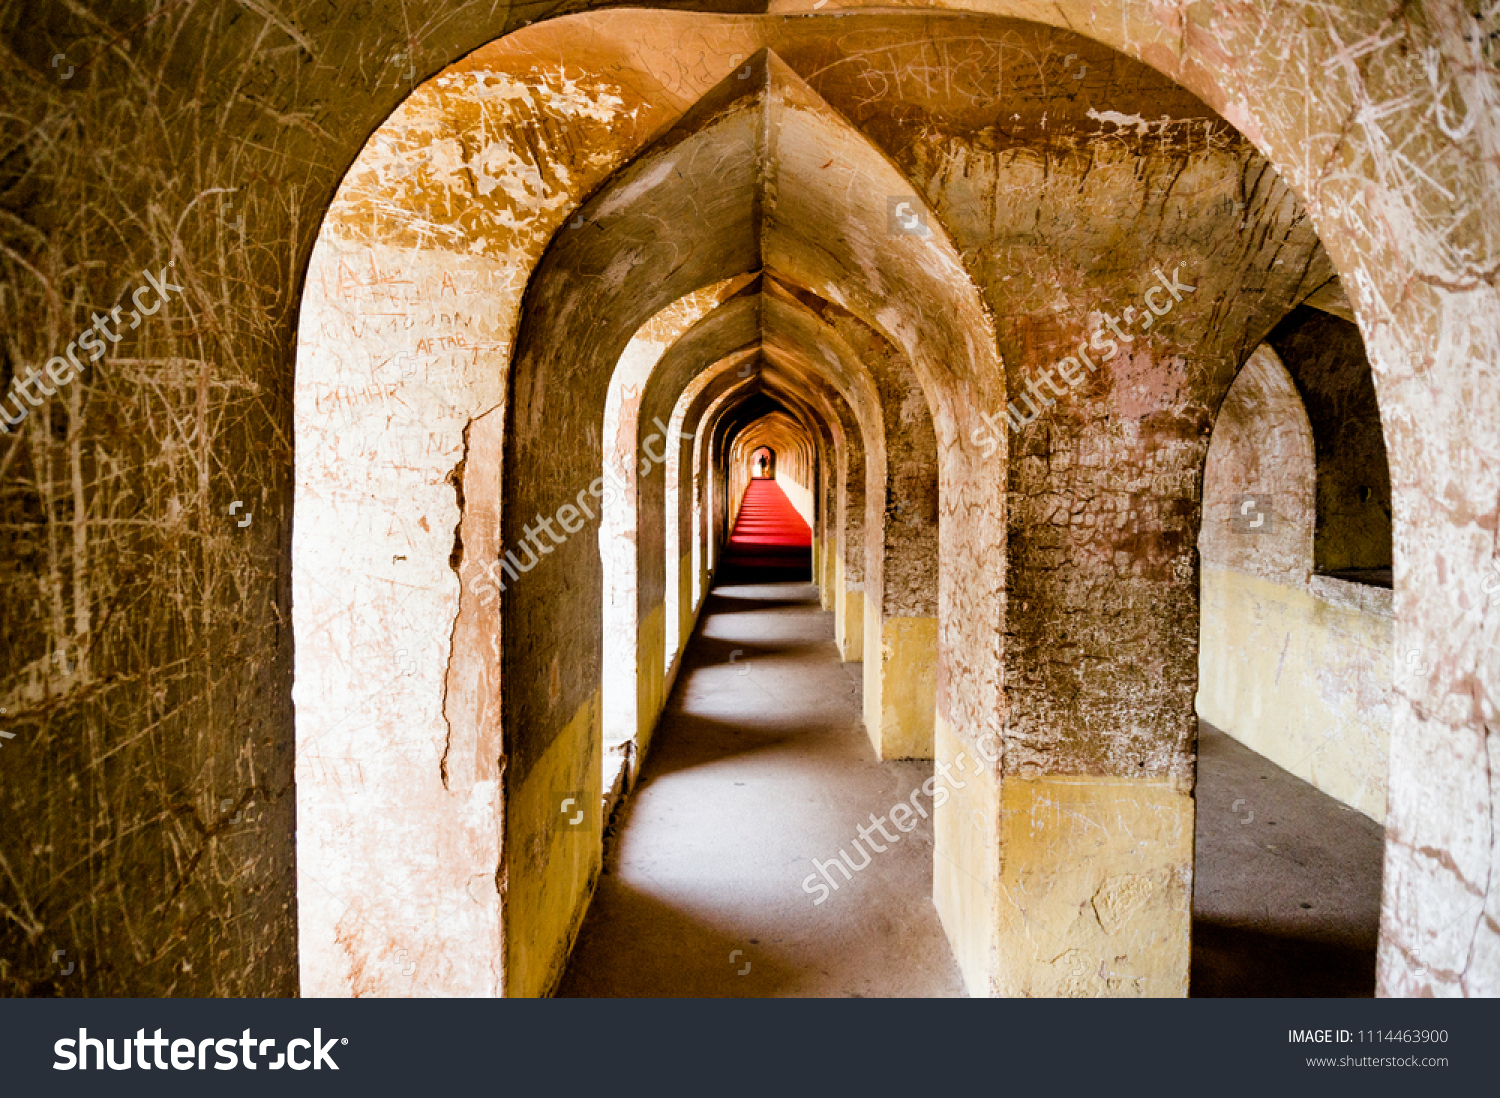 Arches and hallways of the bhool bhuliya maze that leads to the roof of the complex. This amazing architecture marvel prevents anyone without a guide from reaching the palace roof #1114463900